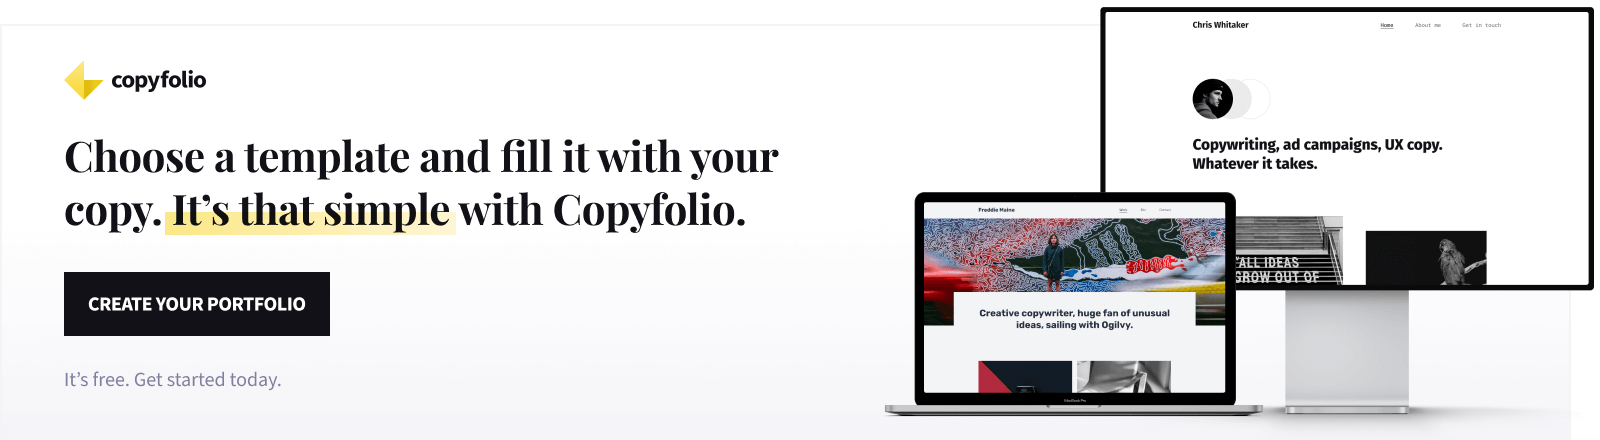 Choose a template and fill it with your copy. It's that simple with Copyfolio.